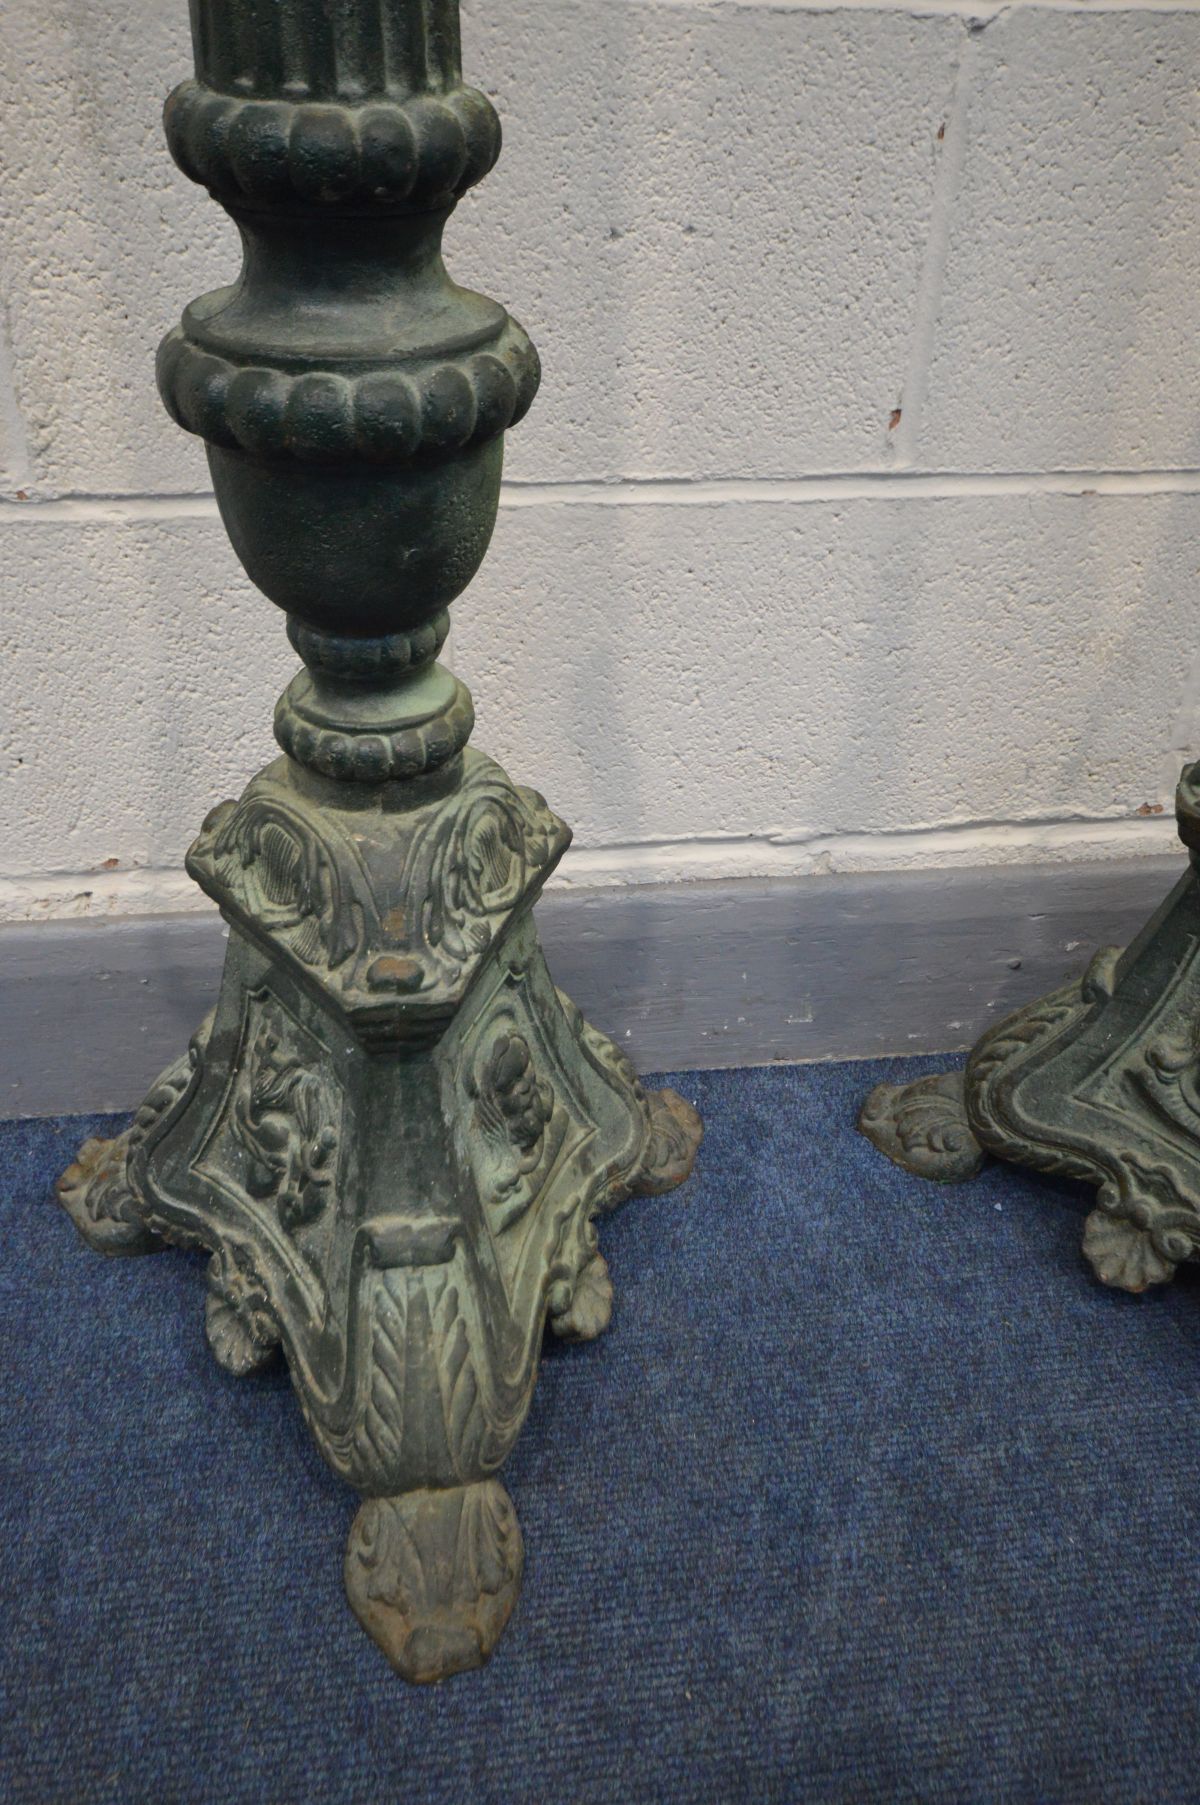 A PAIR OF ORNATE/GOTHIC CAST IRON PRICKET CANDLE STANDS, with later frosted cylindrical glass - Image 4 of 4